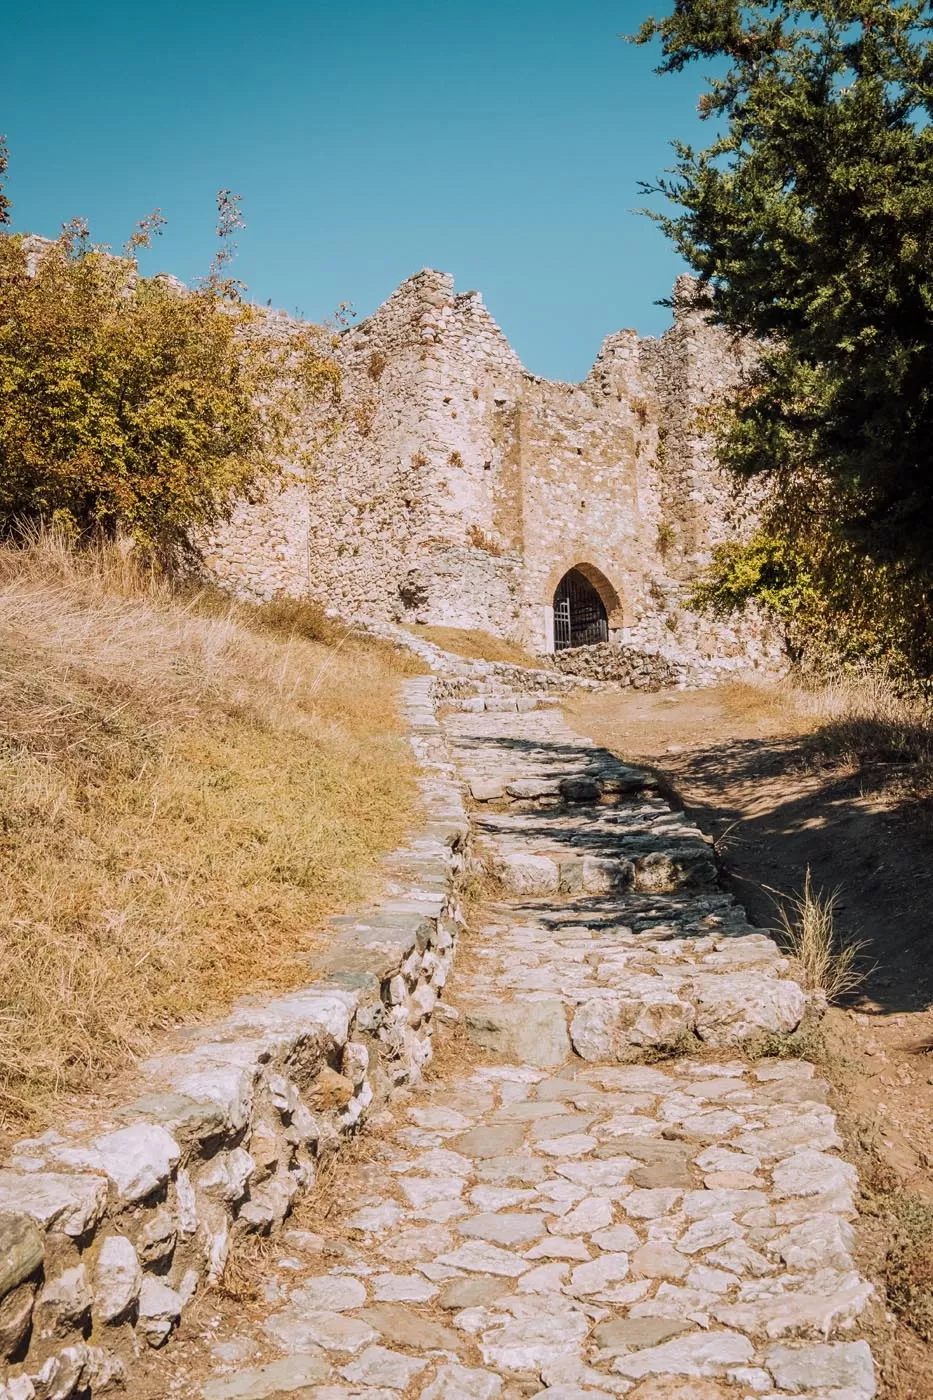 Things to do in Thessaloniki - Byzantine Castle of Platamon - Entrance